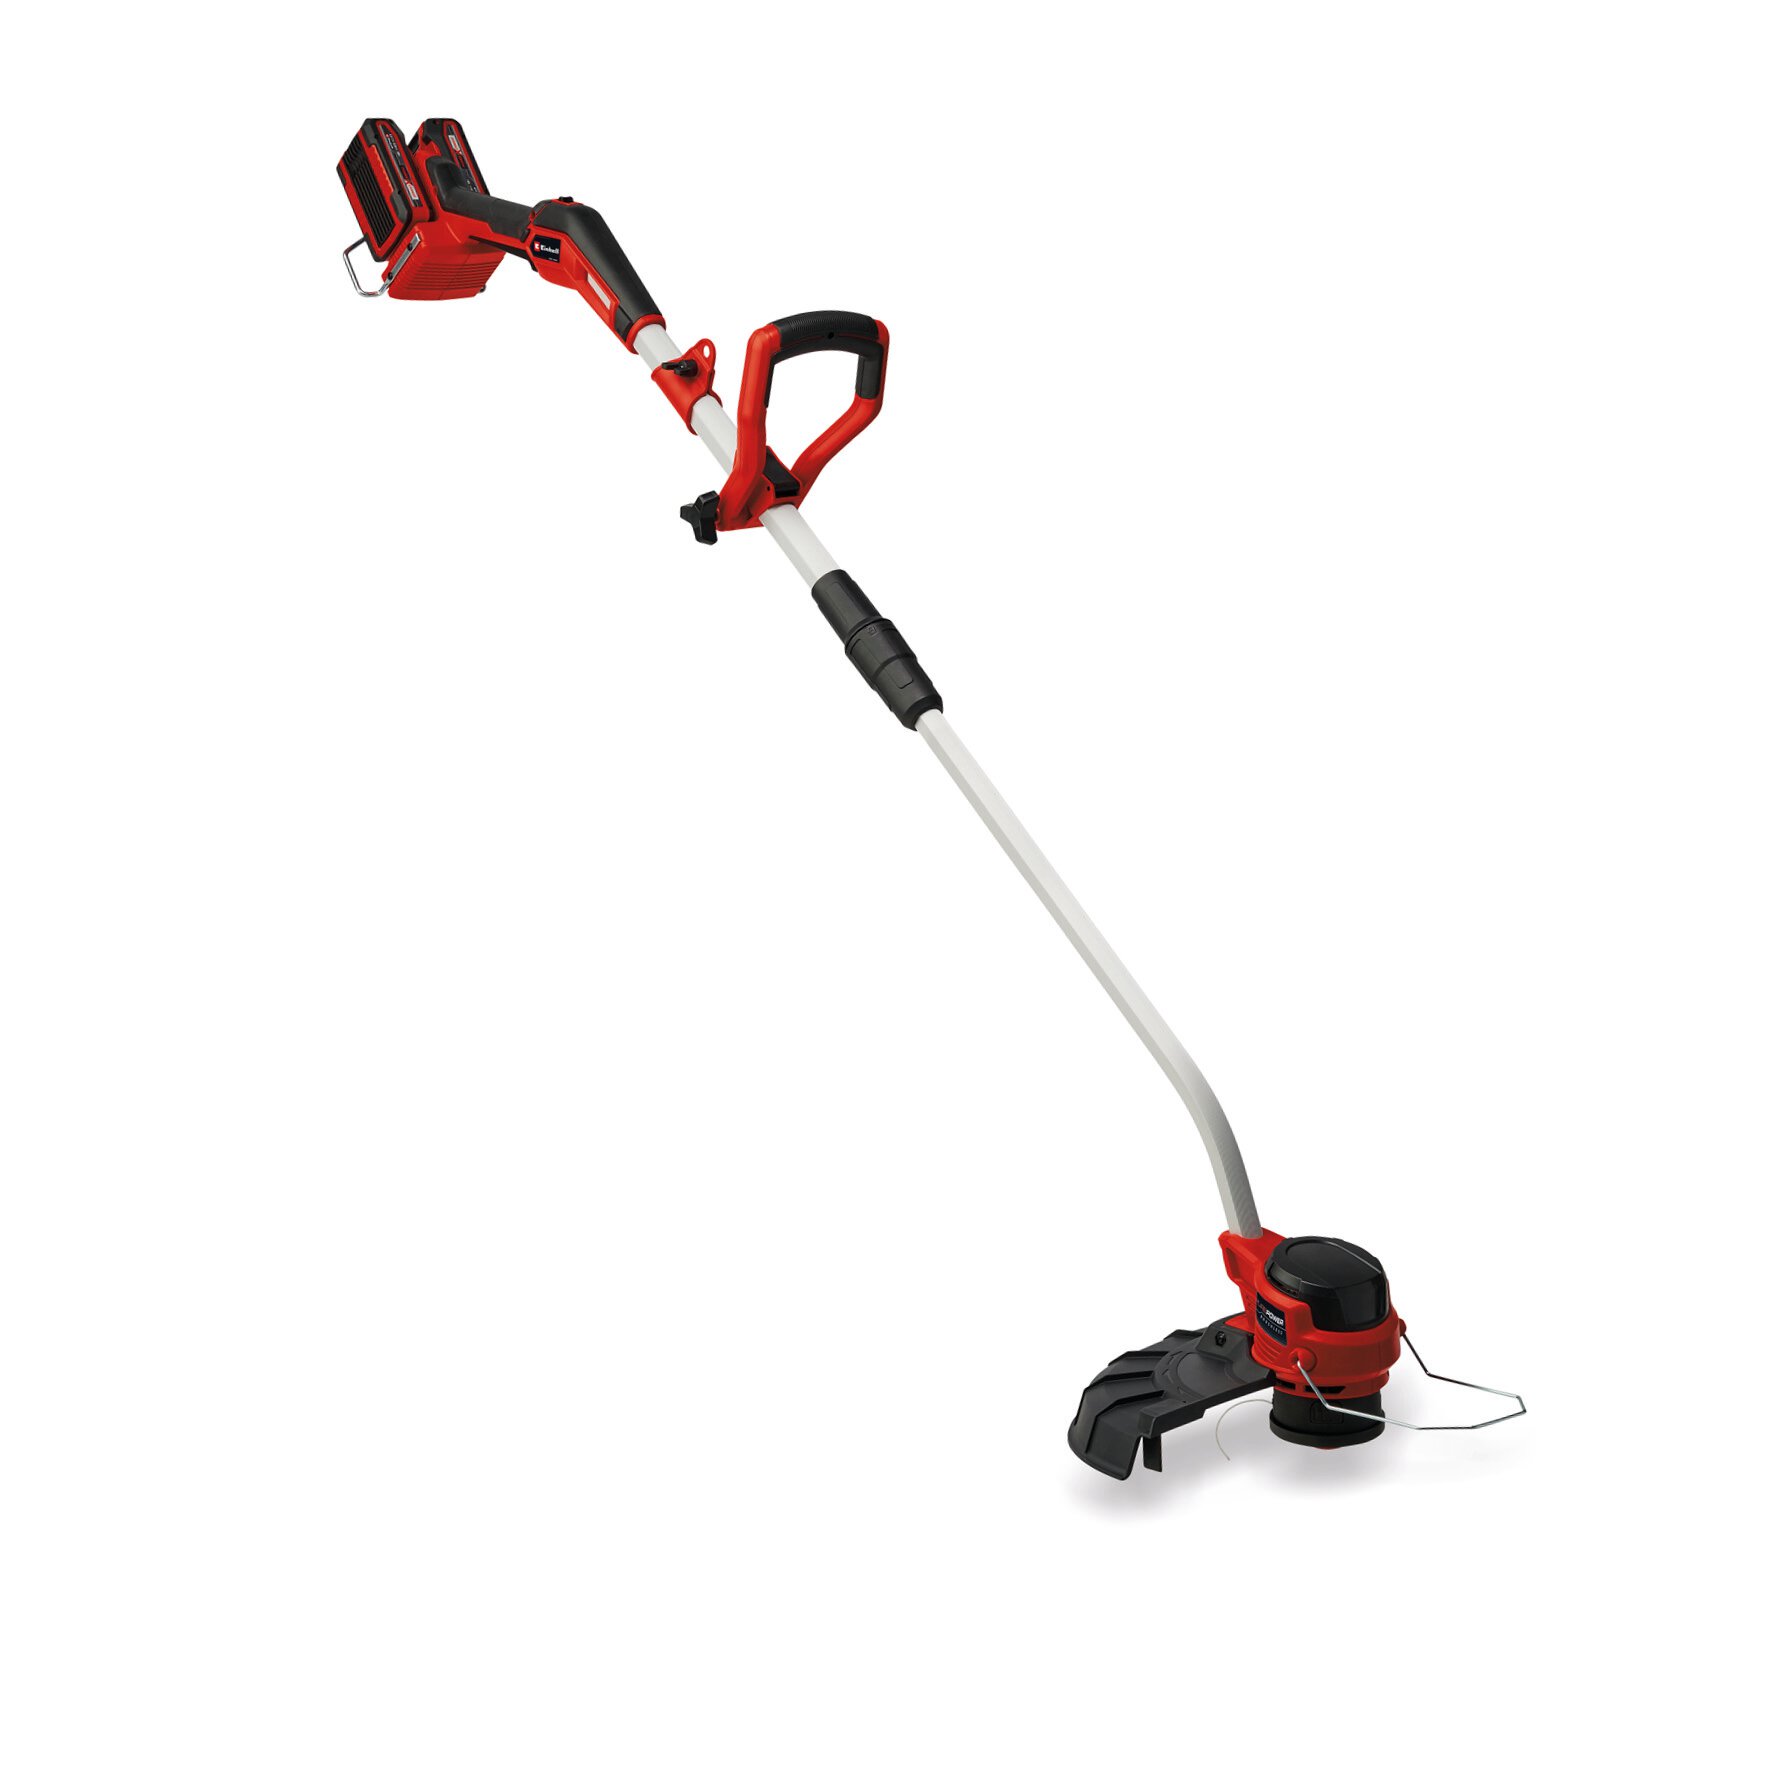 einhell-professional-cordless-lawn-trimmer-3411330-detail_image-002